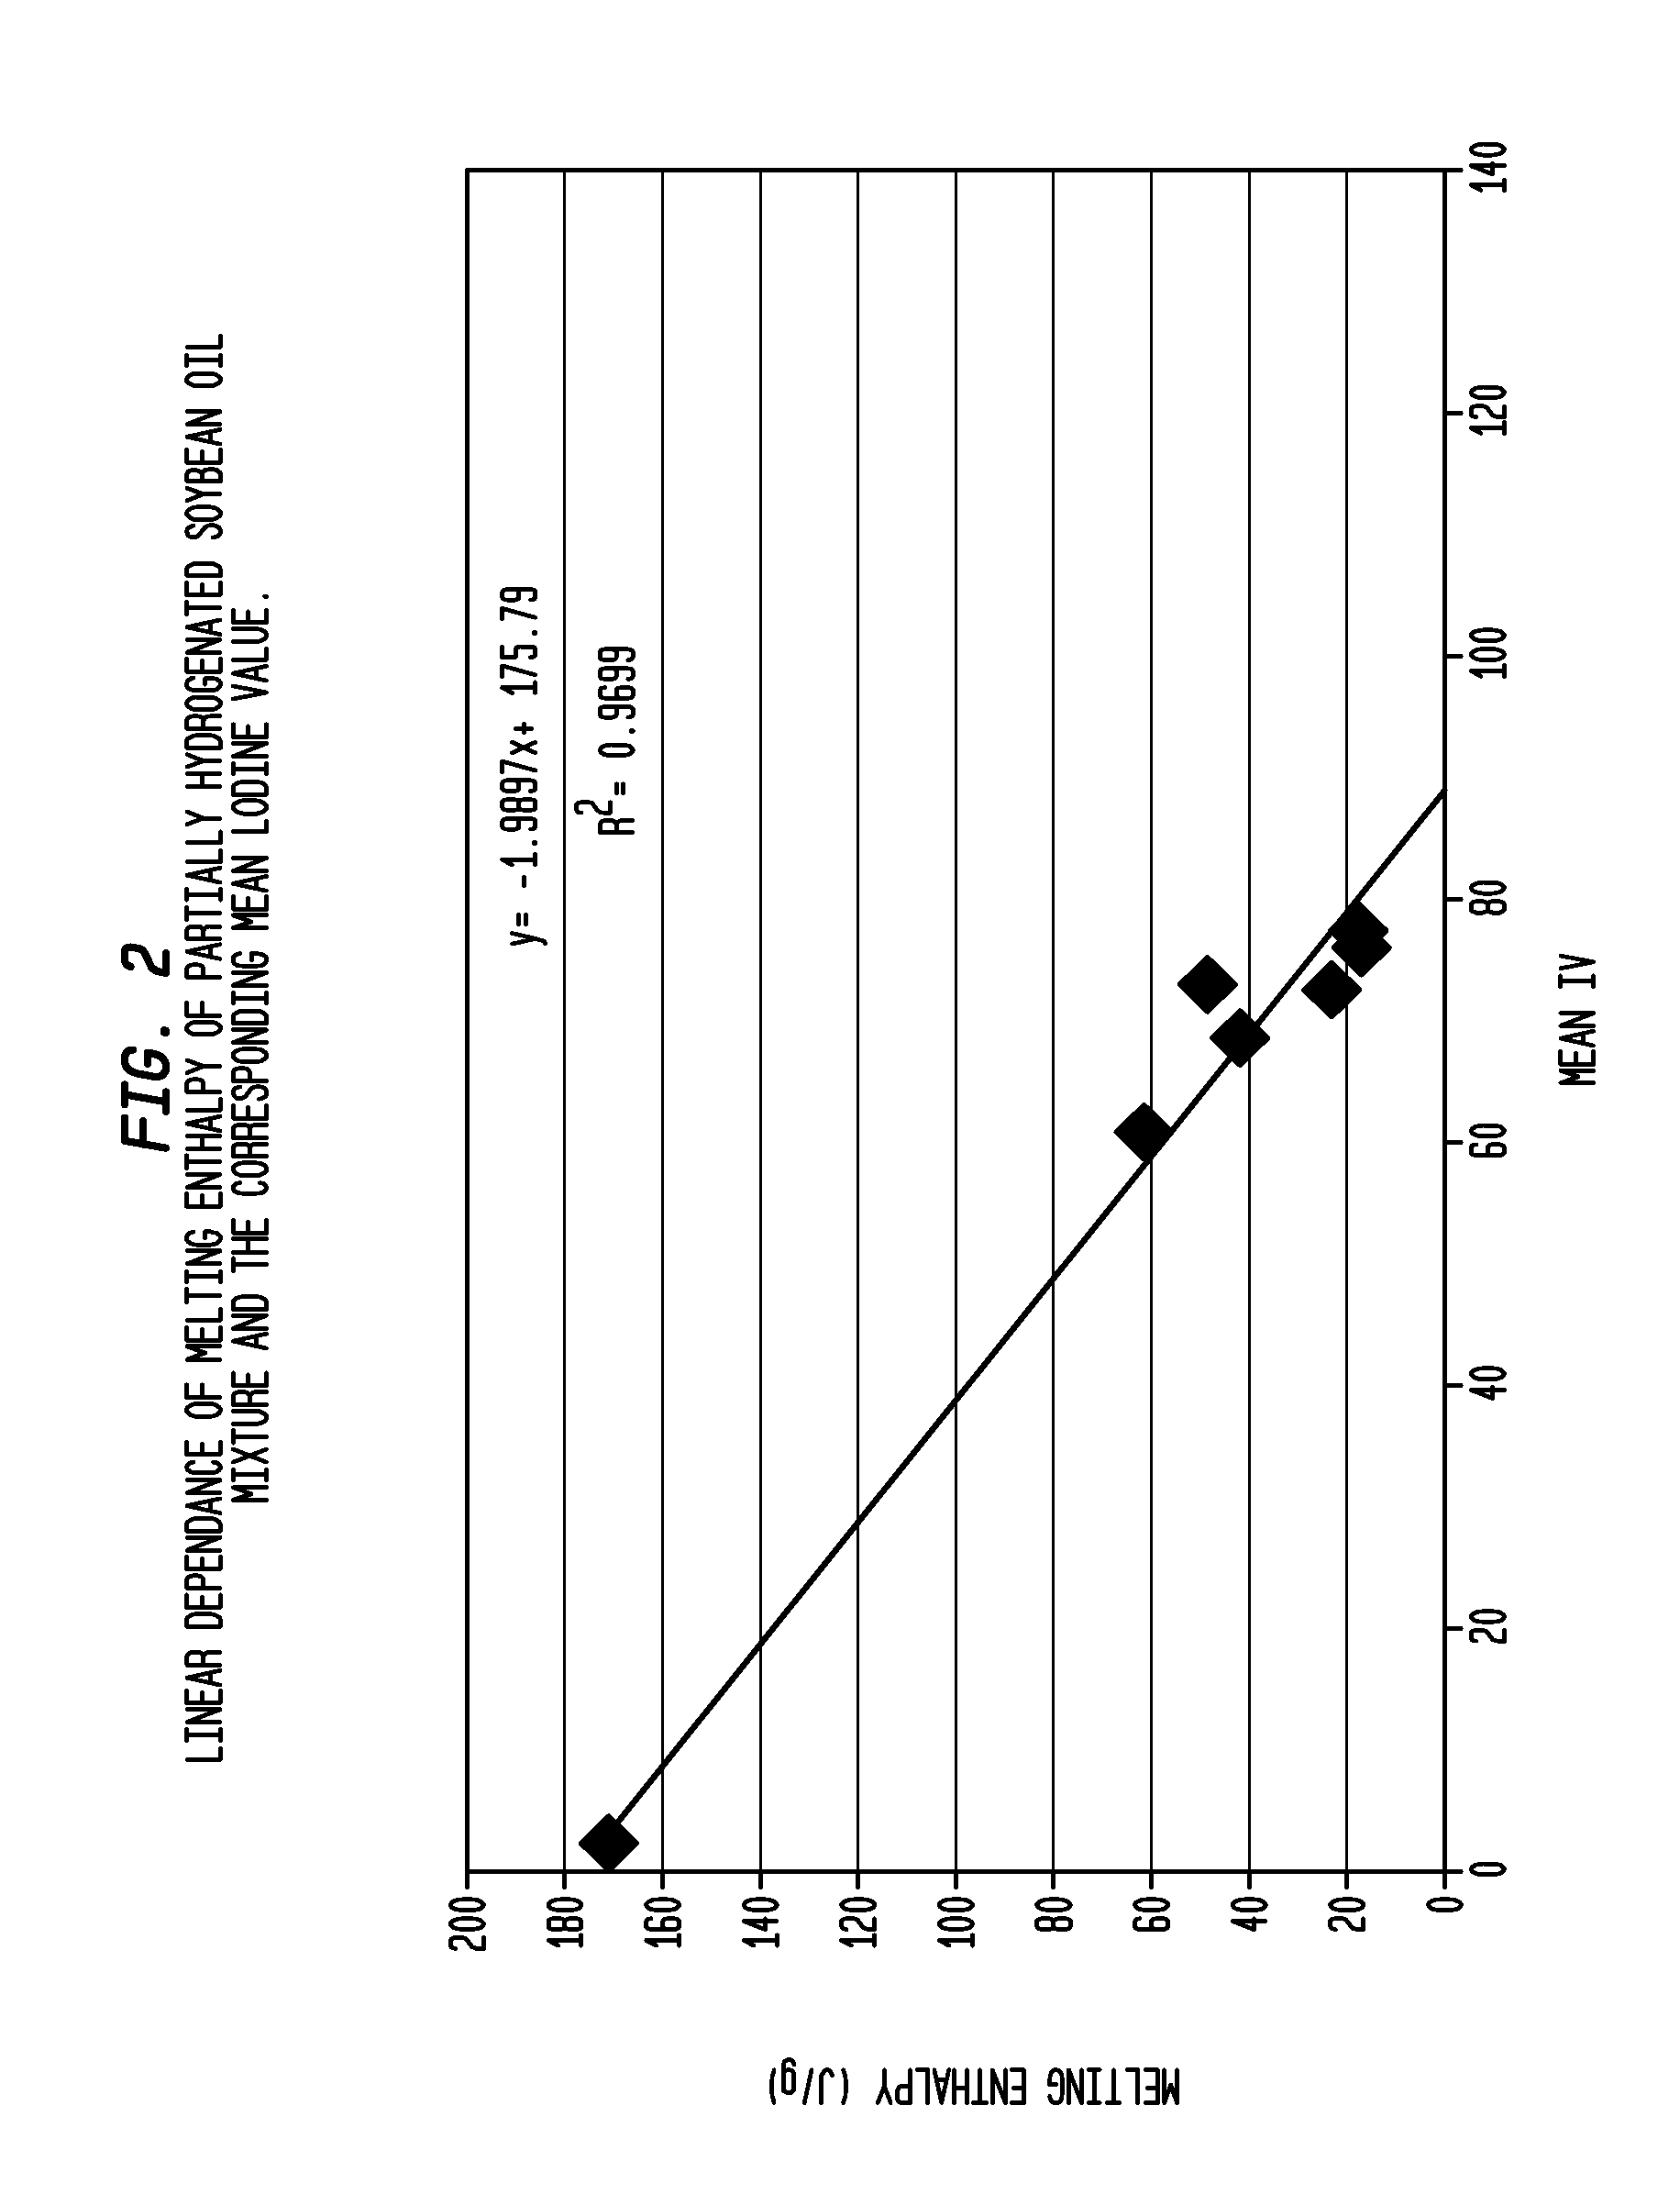 Stable Liquid Cleansing Compositions Comprising Critical Window of Partially Hydrogenated Triglyceride Oil of Defined Iodine Value